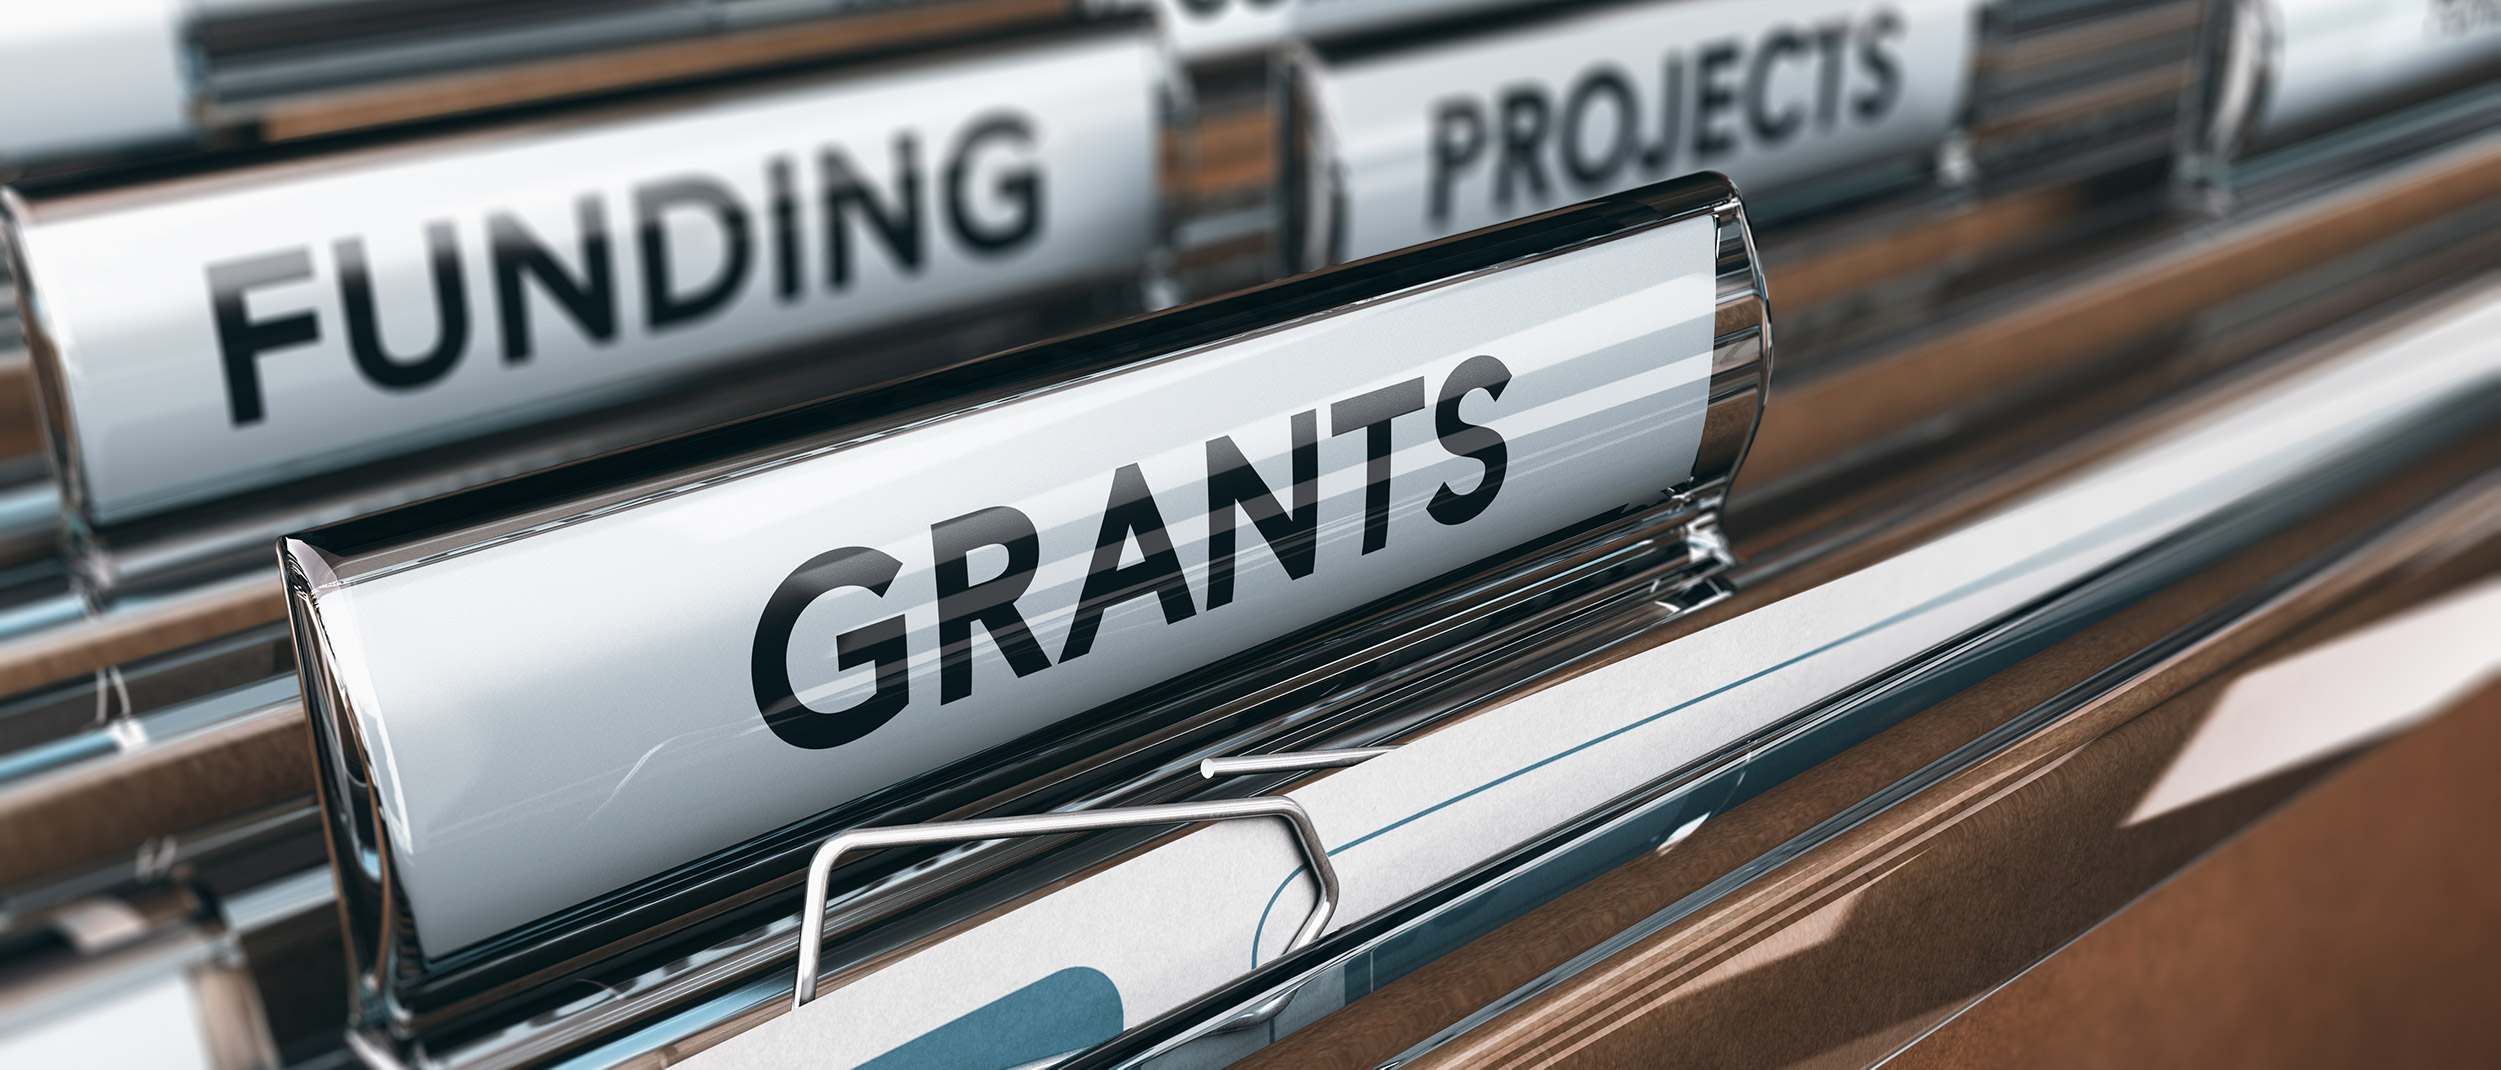 Folders labeled Funding, Projects, Grants